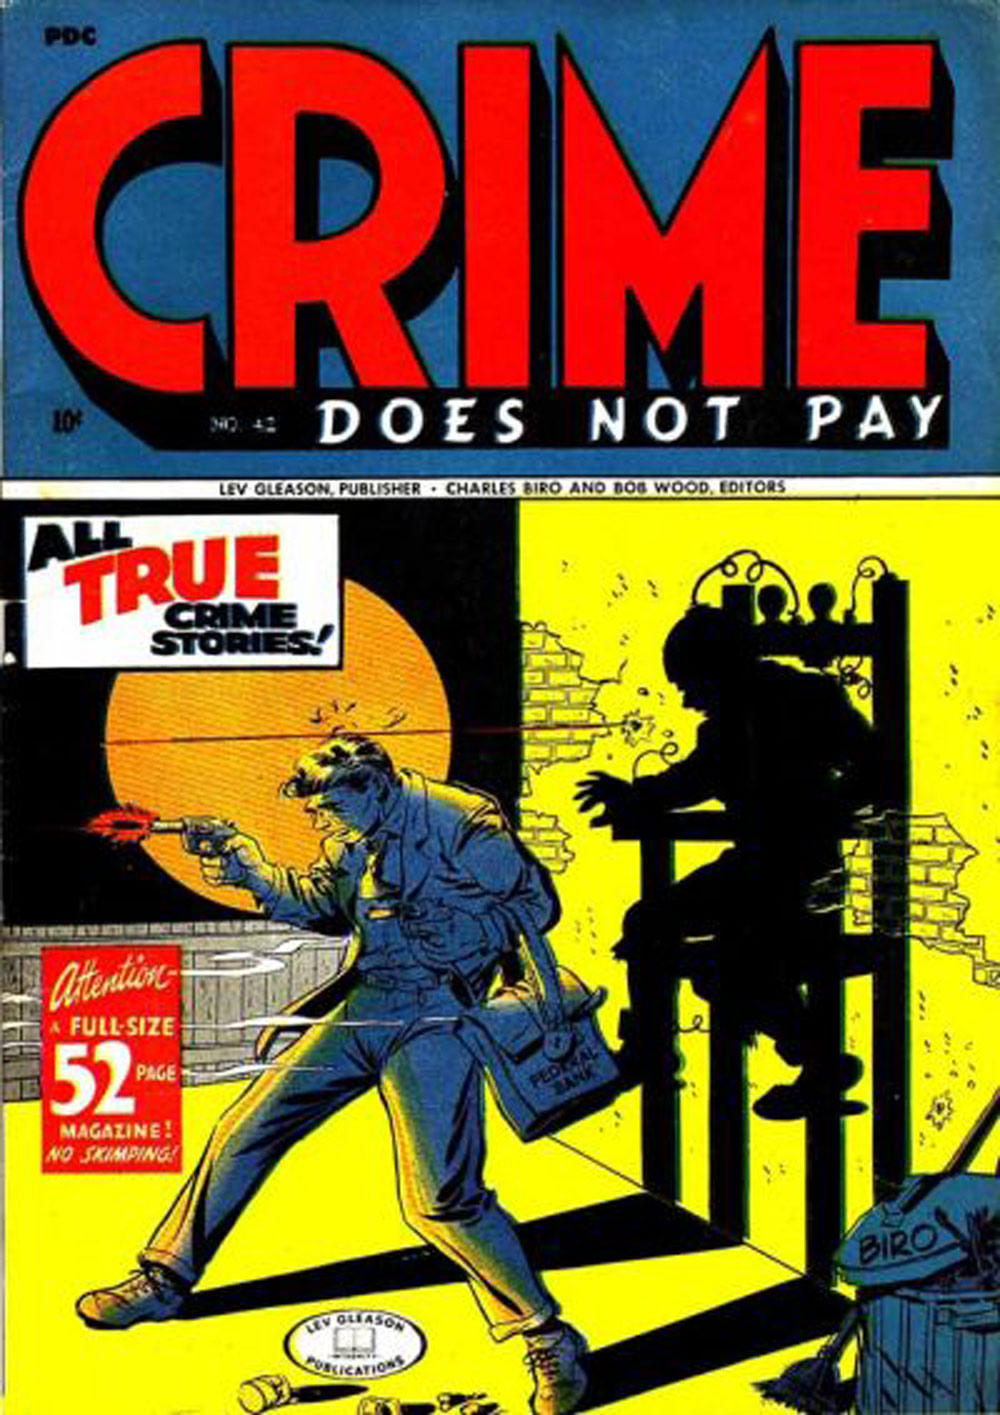 PHOTO: Cover of Crime Does Not Pay #42 (1945) Lev Gleason. Cover art by Charles Biro. Image courtesy of Wikipedia.